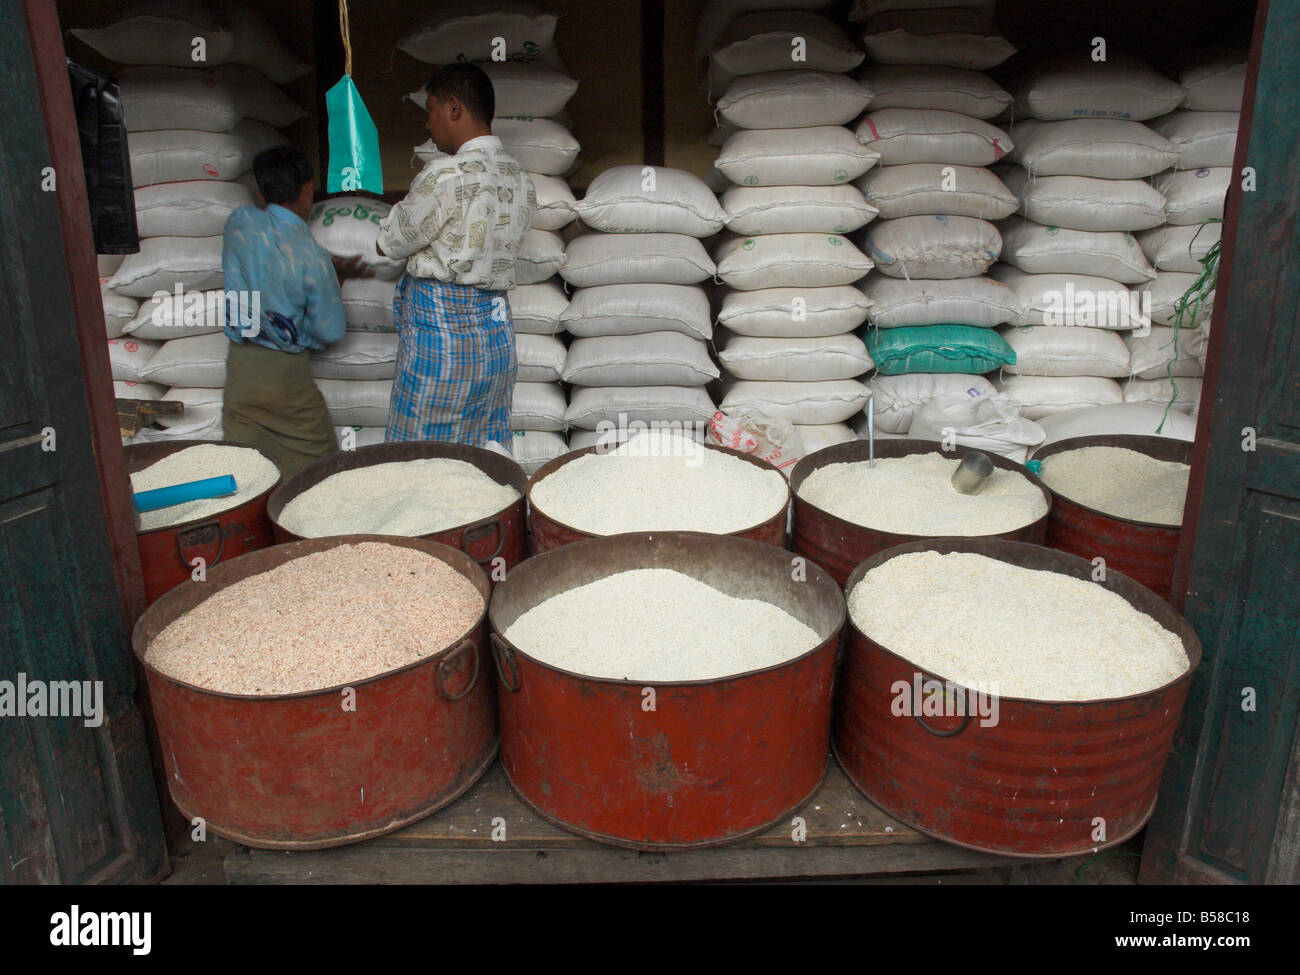 Rice stall at the daily market, Kalaw, Shan State, Myanmar (Burma) Stock Photo